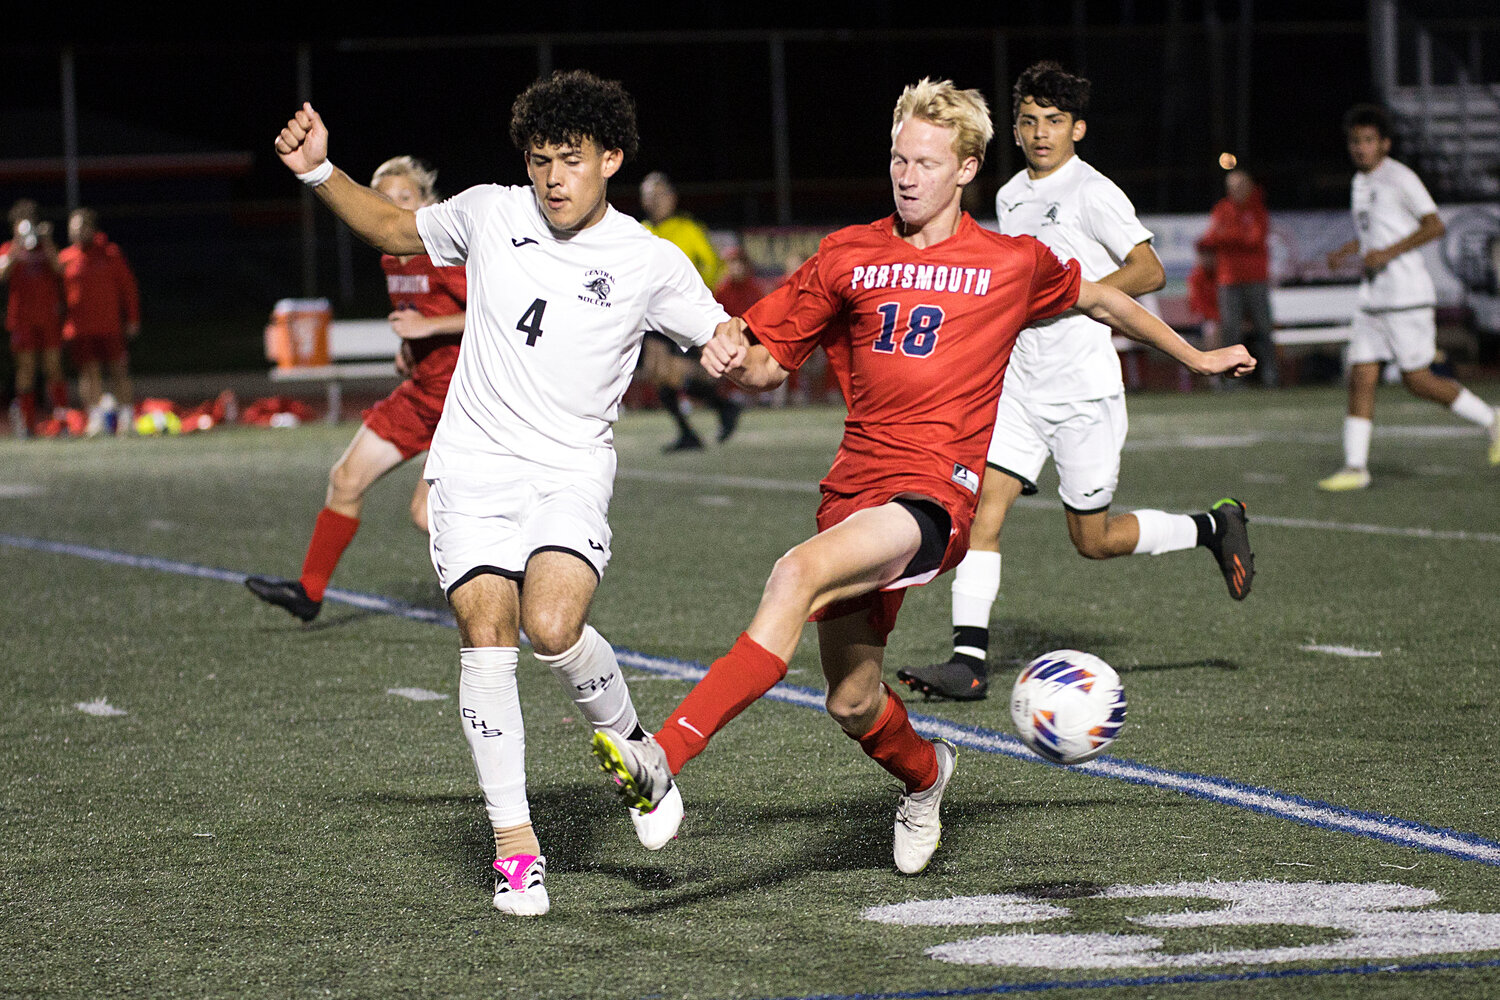 Nathaniel DeConto beats a Central opponent to the ball.